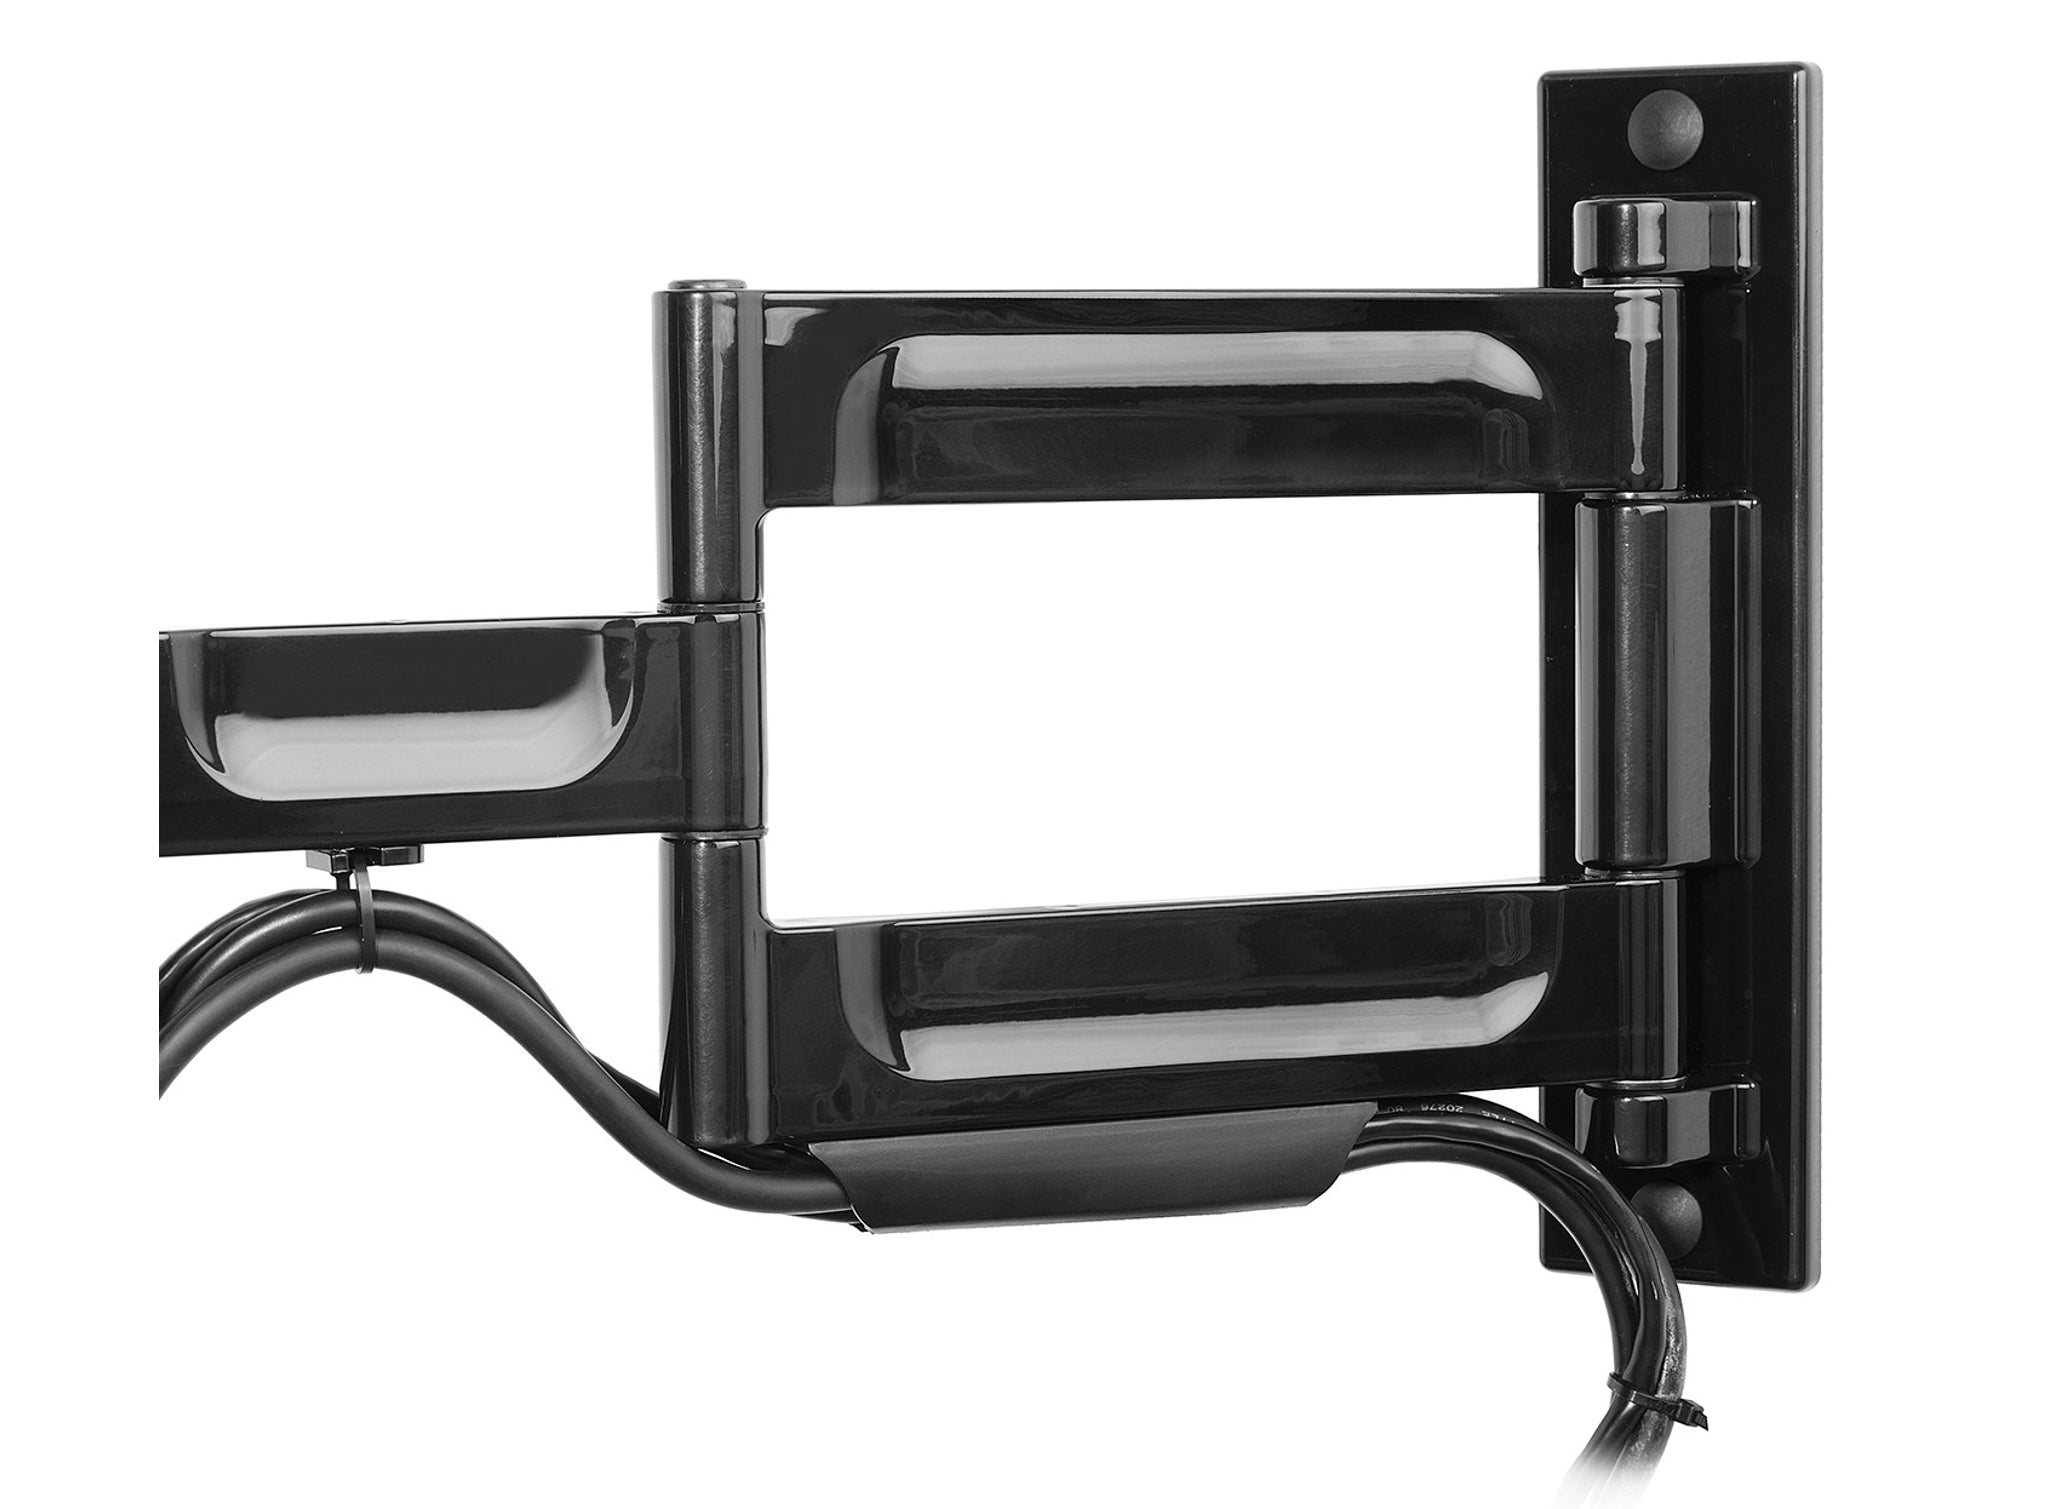 Peerless-AV PA746 - Paramount™ wall mount with articulated arm - 32-50 inch - VESA 400x400 mm - up to 36.3 kg - Black